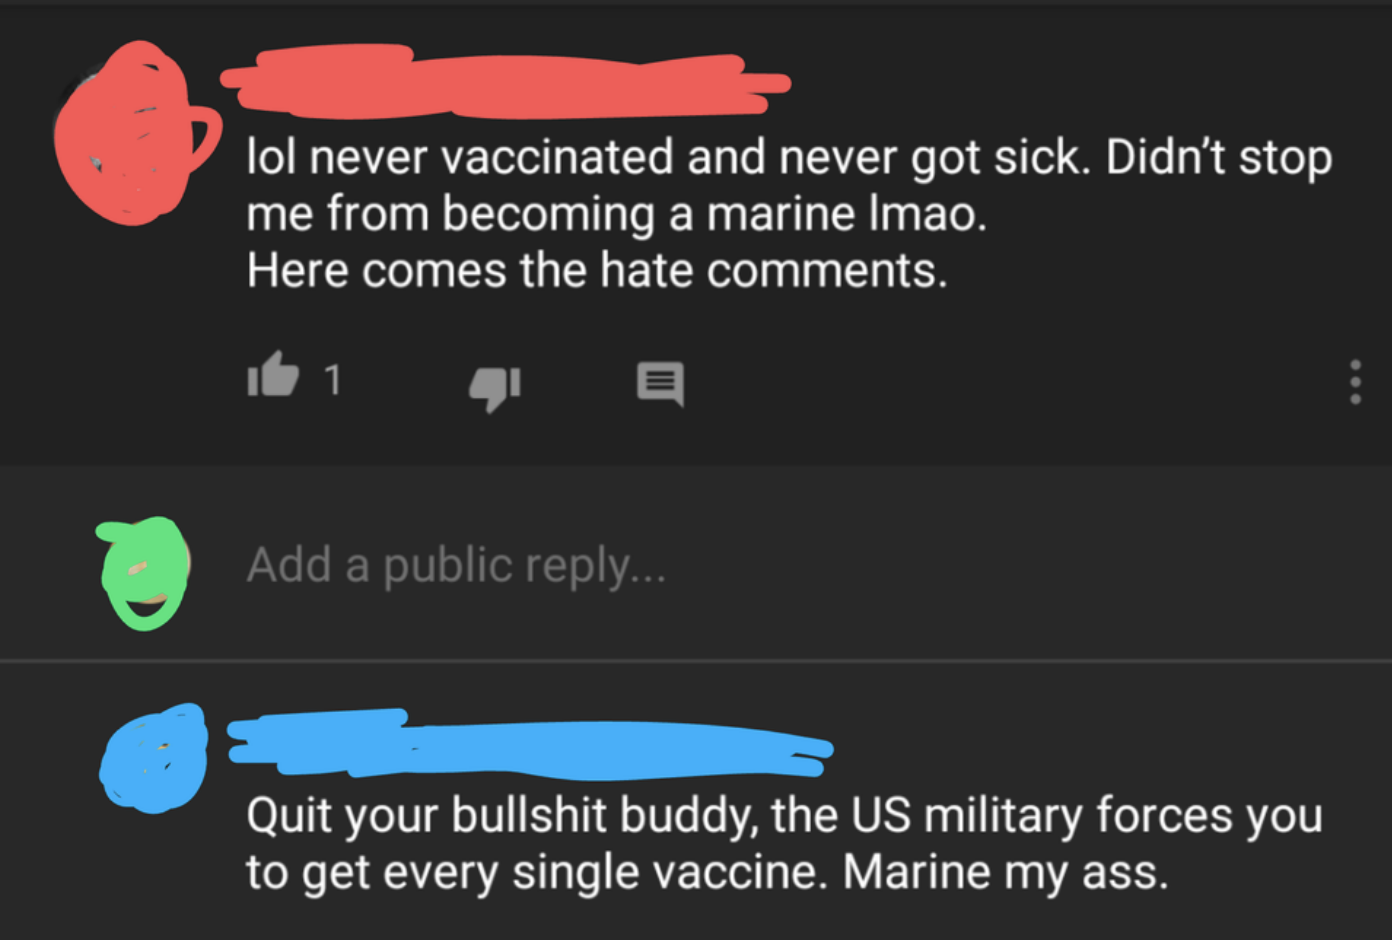 A post from a person saying they never got vaccinated and never got sick, and it didn&#x27;t stop them from becoming a Marine, but a commenter points out that the US military requires you to get every single vaccine